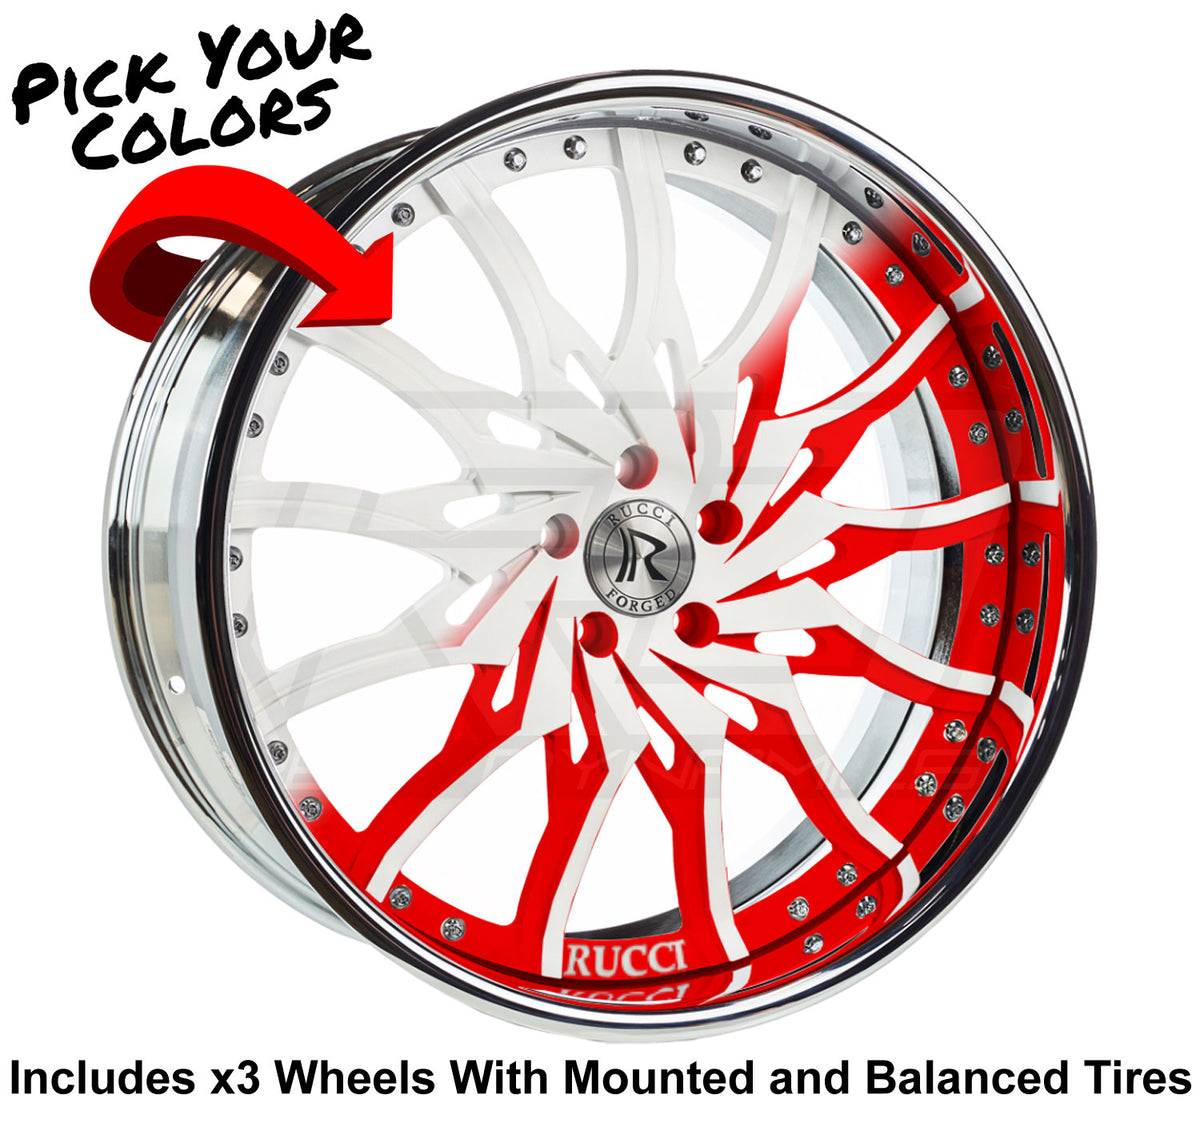 Rucci Dusse 22" wheel in red pearl and white